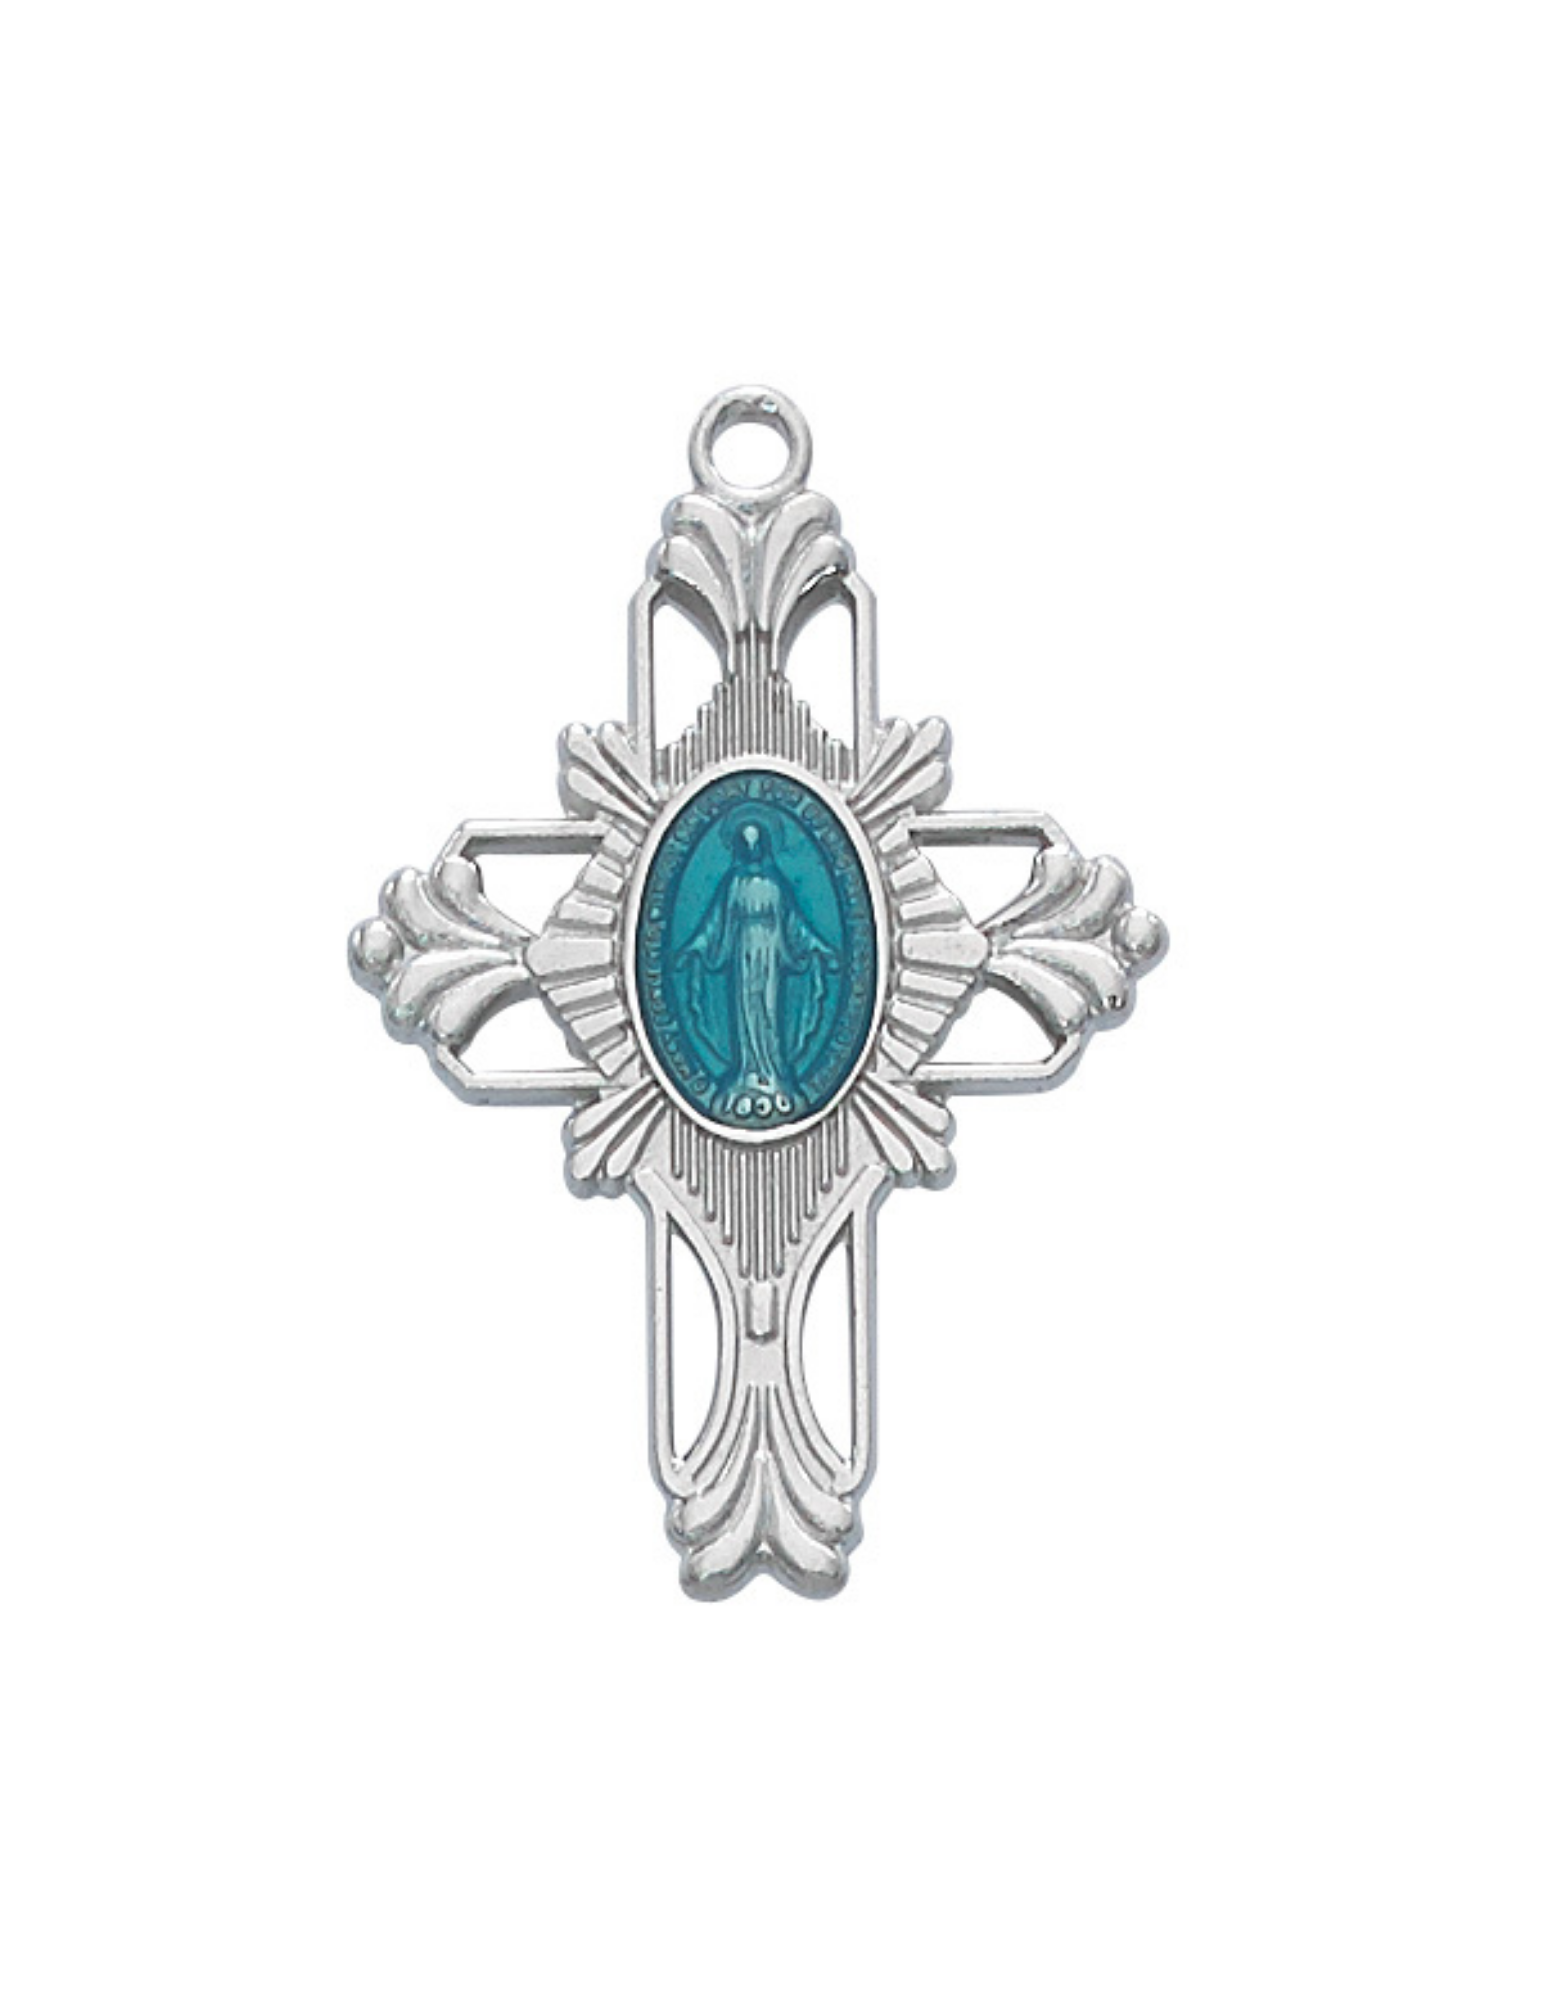 Blue Miraculous Medal Center Cross w/ 20" Rhodium Plated Chain - image 1 of 1